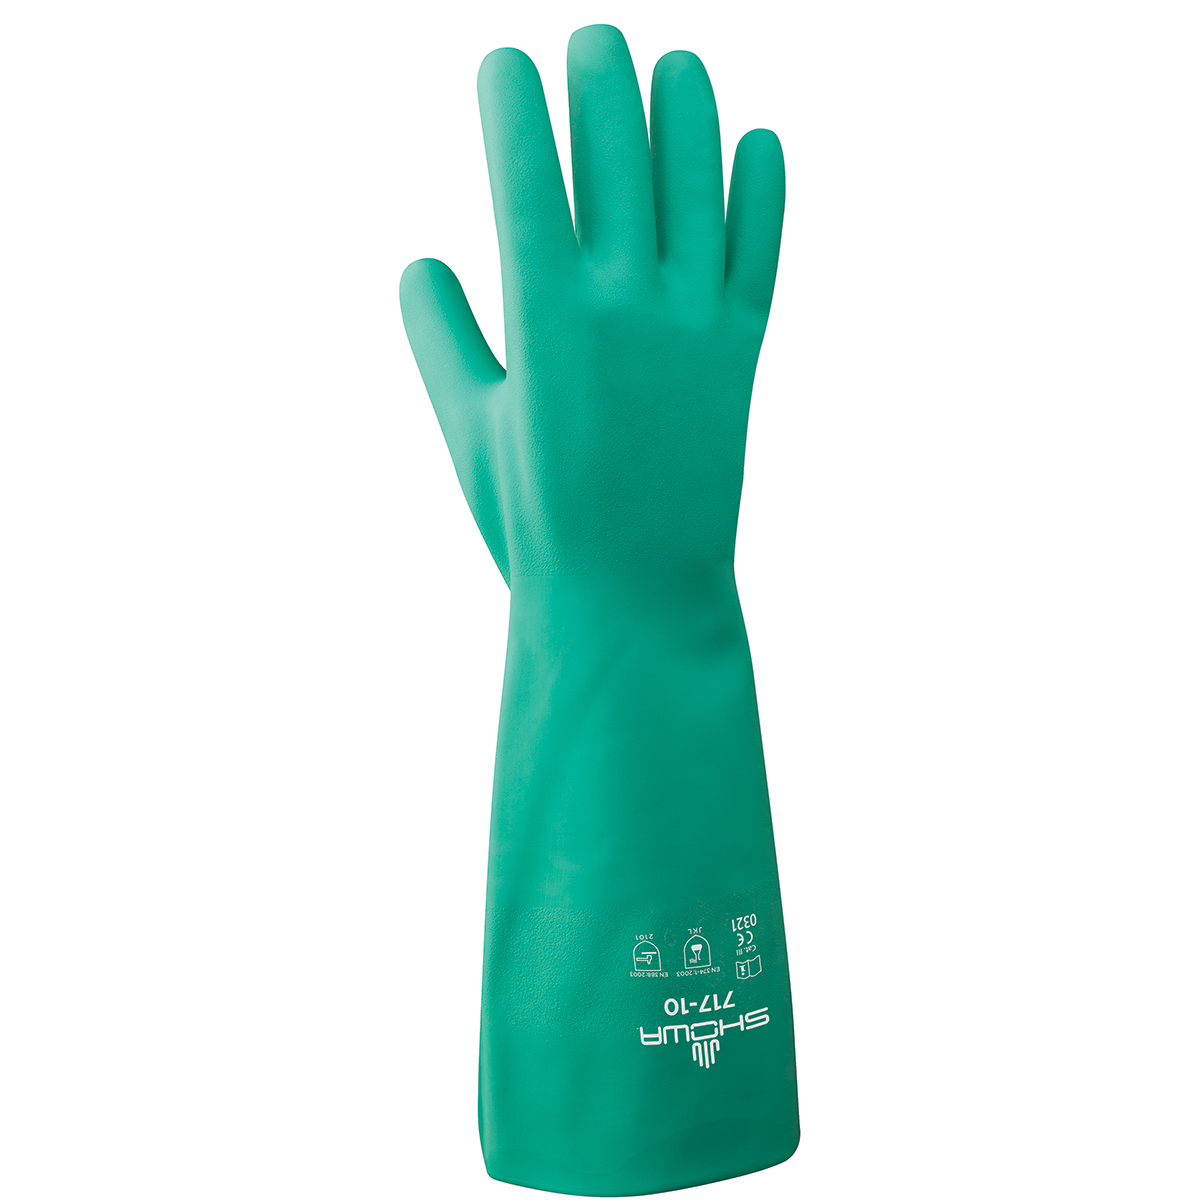 Chemical resistant unsupported nitrile, 13", 11-mil, light green, bisque finish, unlined, large